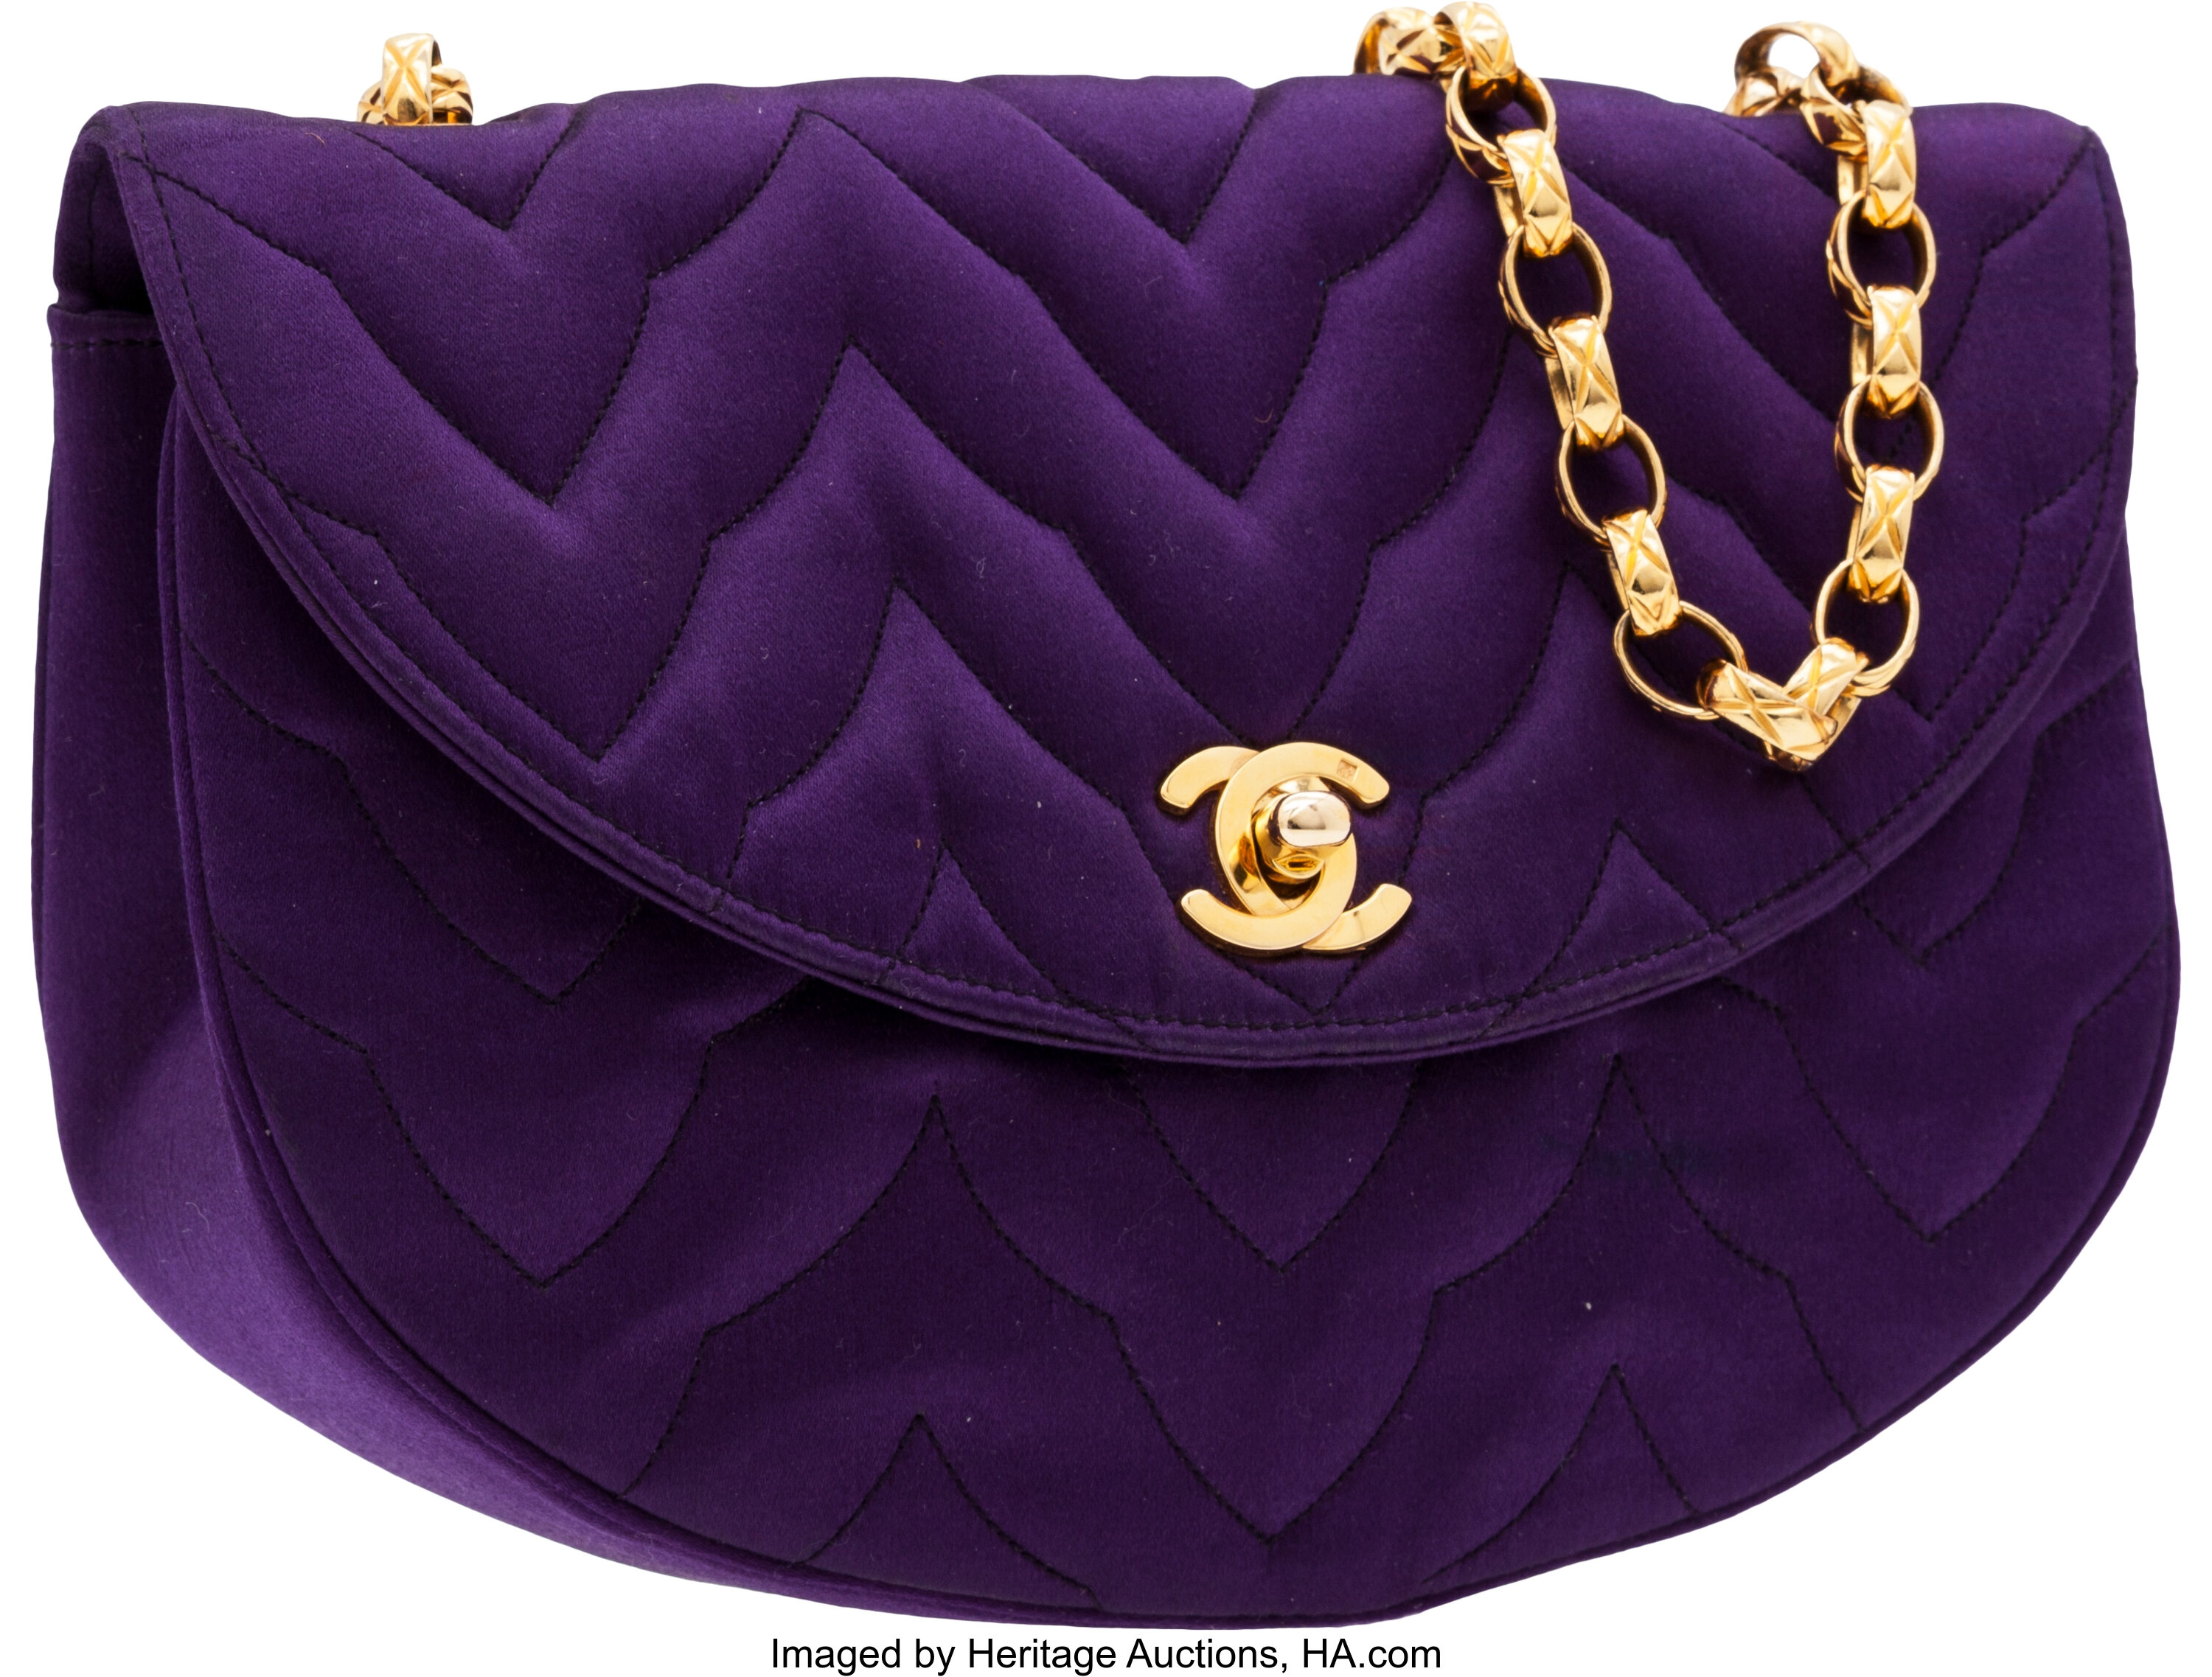 Chanel Deep Purple Satin Quilted Evening Bag with Gold Chain Strap